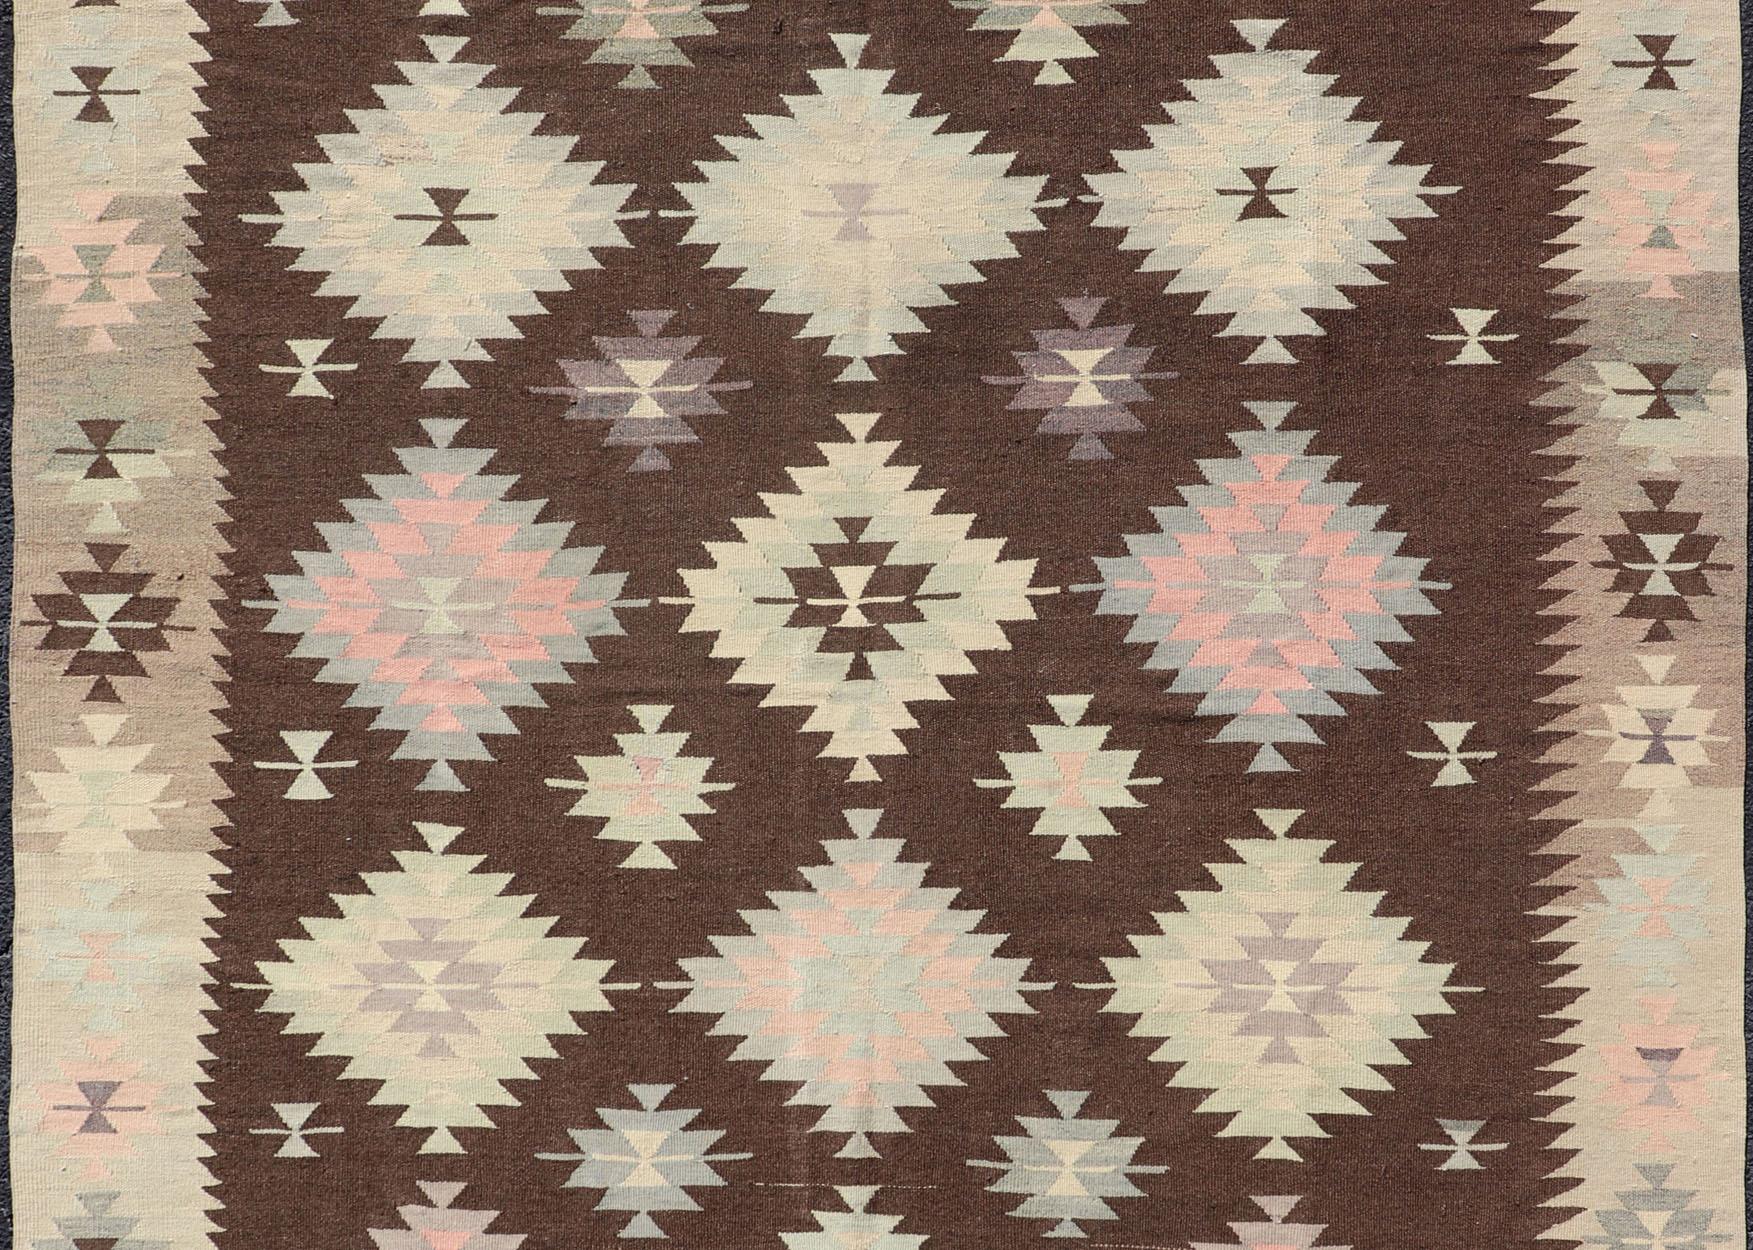 Hand-Knotted Tribal and Geometrics Turkish Kilim in Brown with Cream, Pink, Light Gray/Blue For Sale